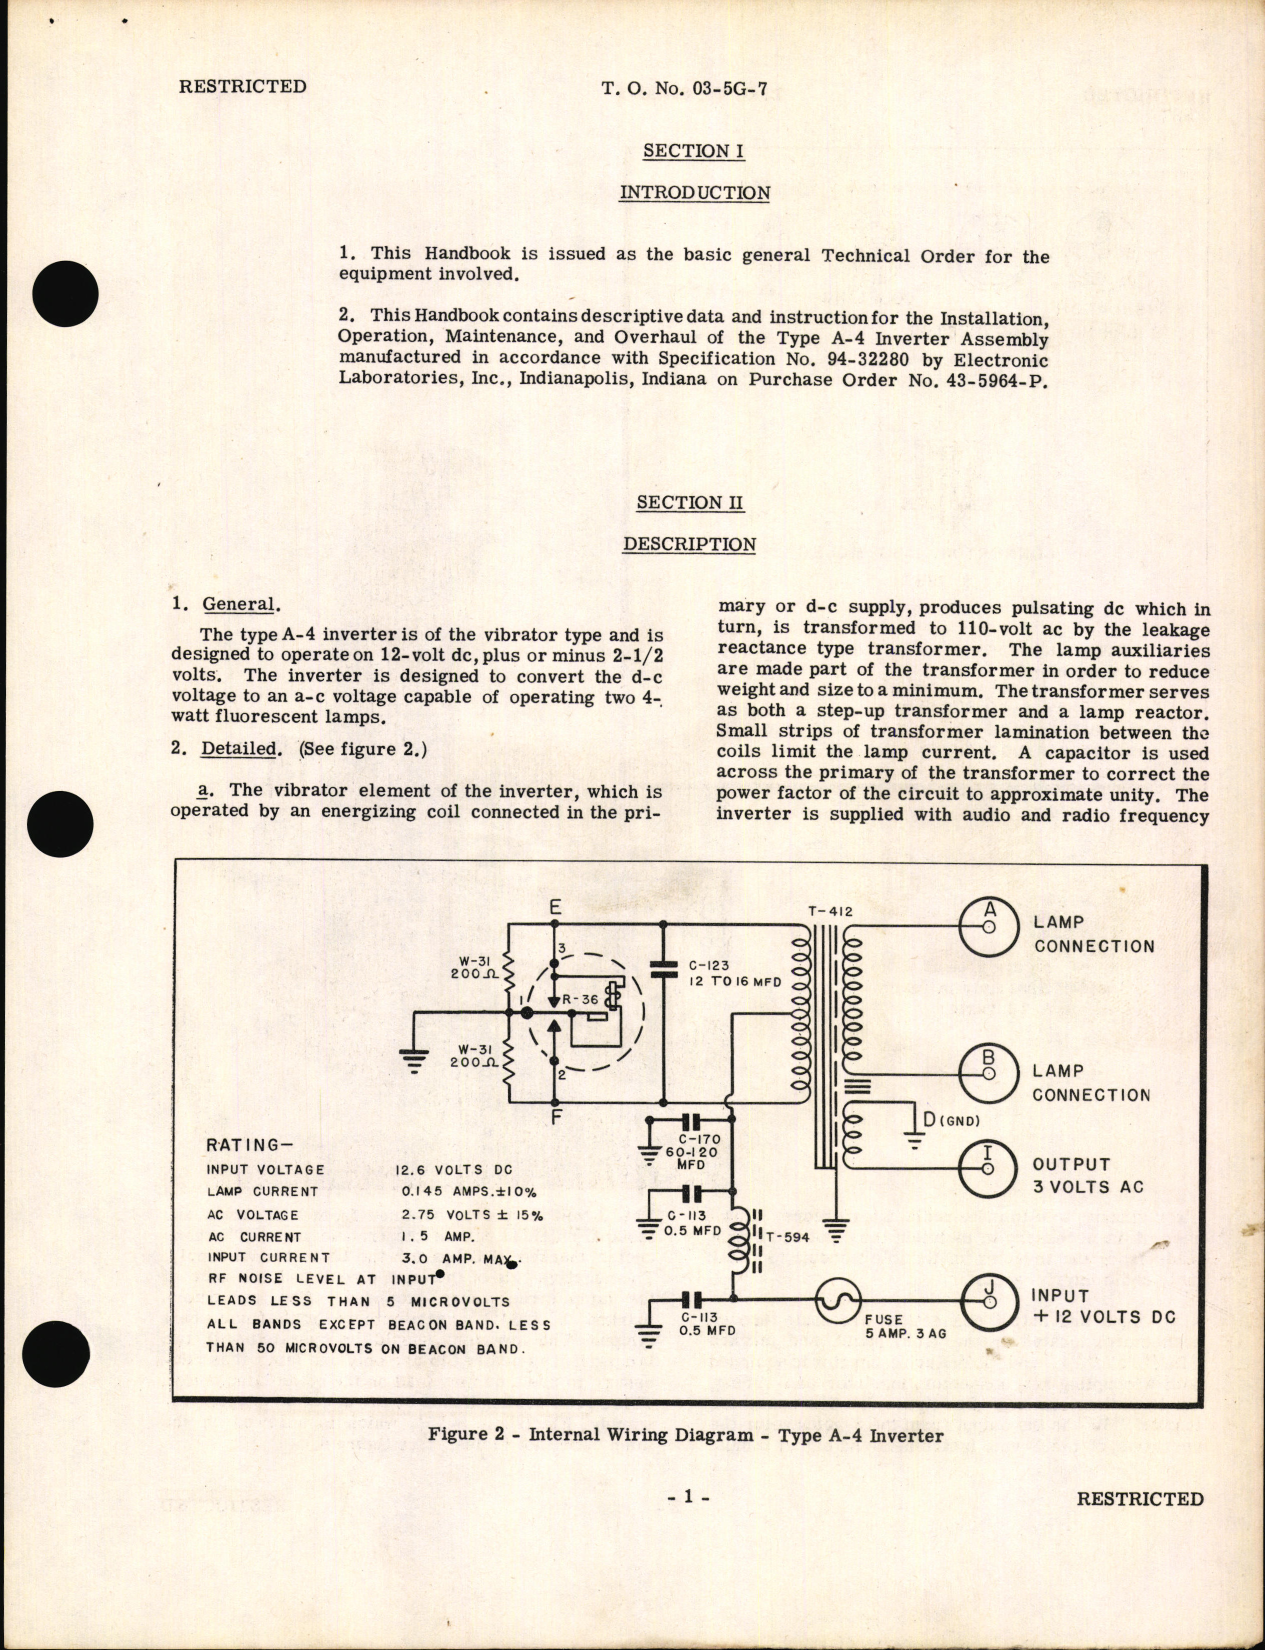 Sample page 5 from AirCorps Library document: Handbook of Instructions with Parts Catalog for Type A-4 Inverter